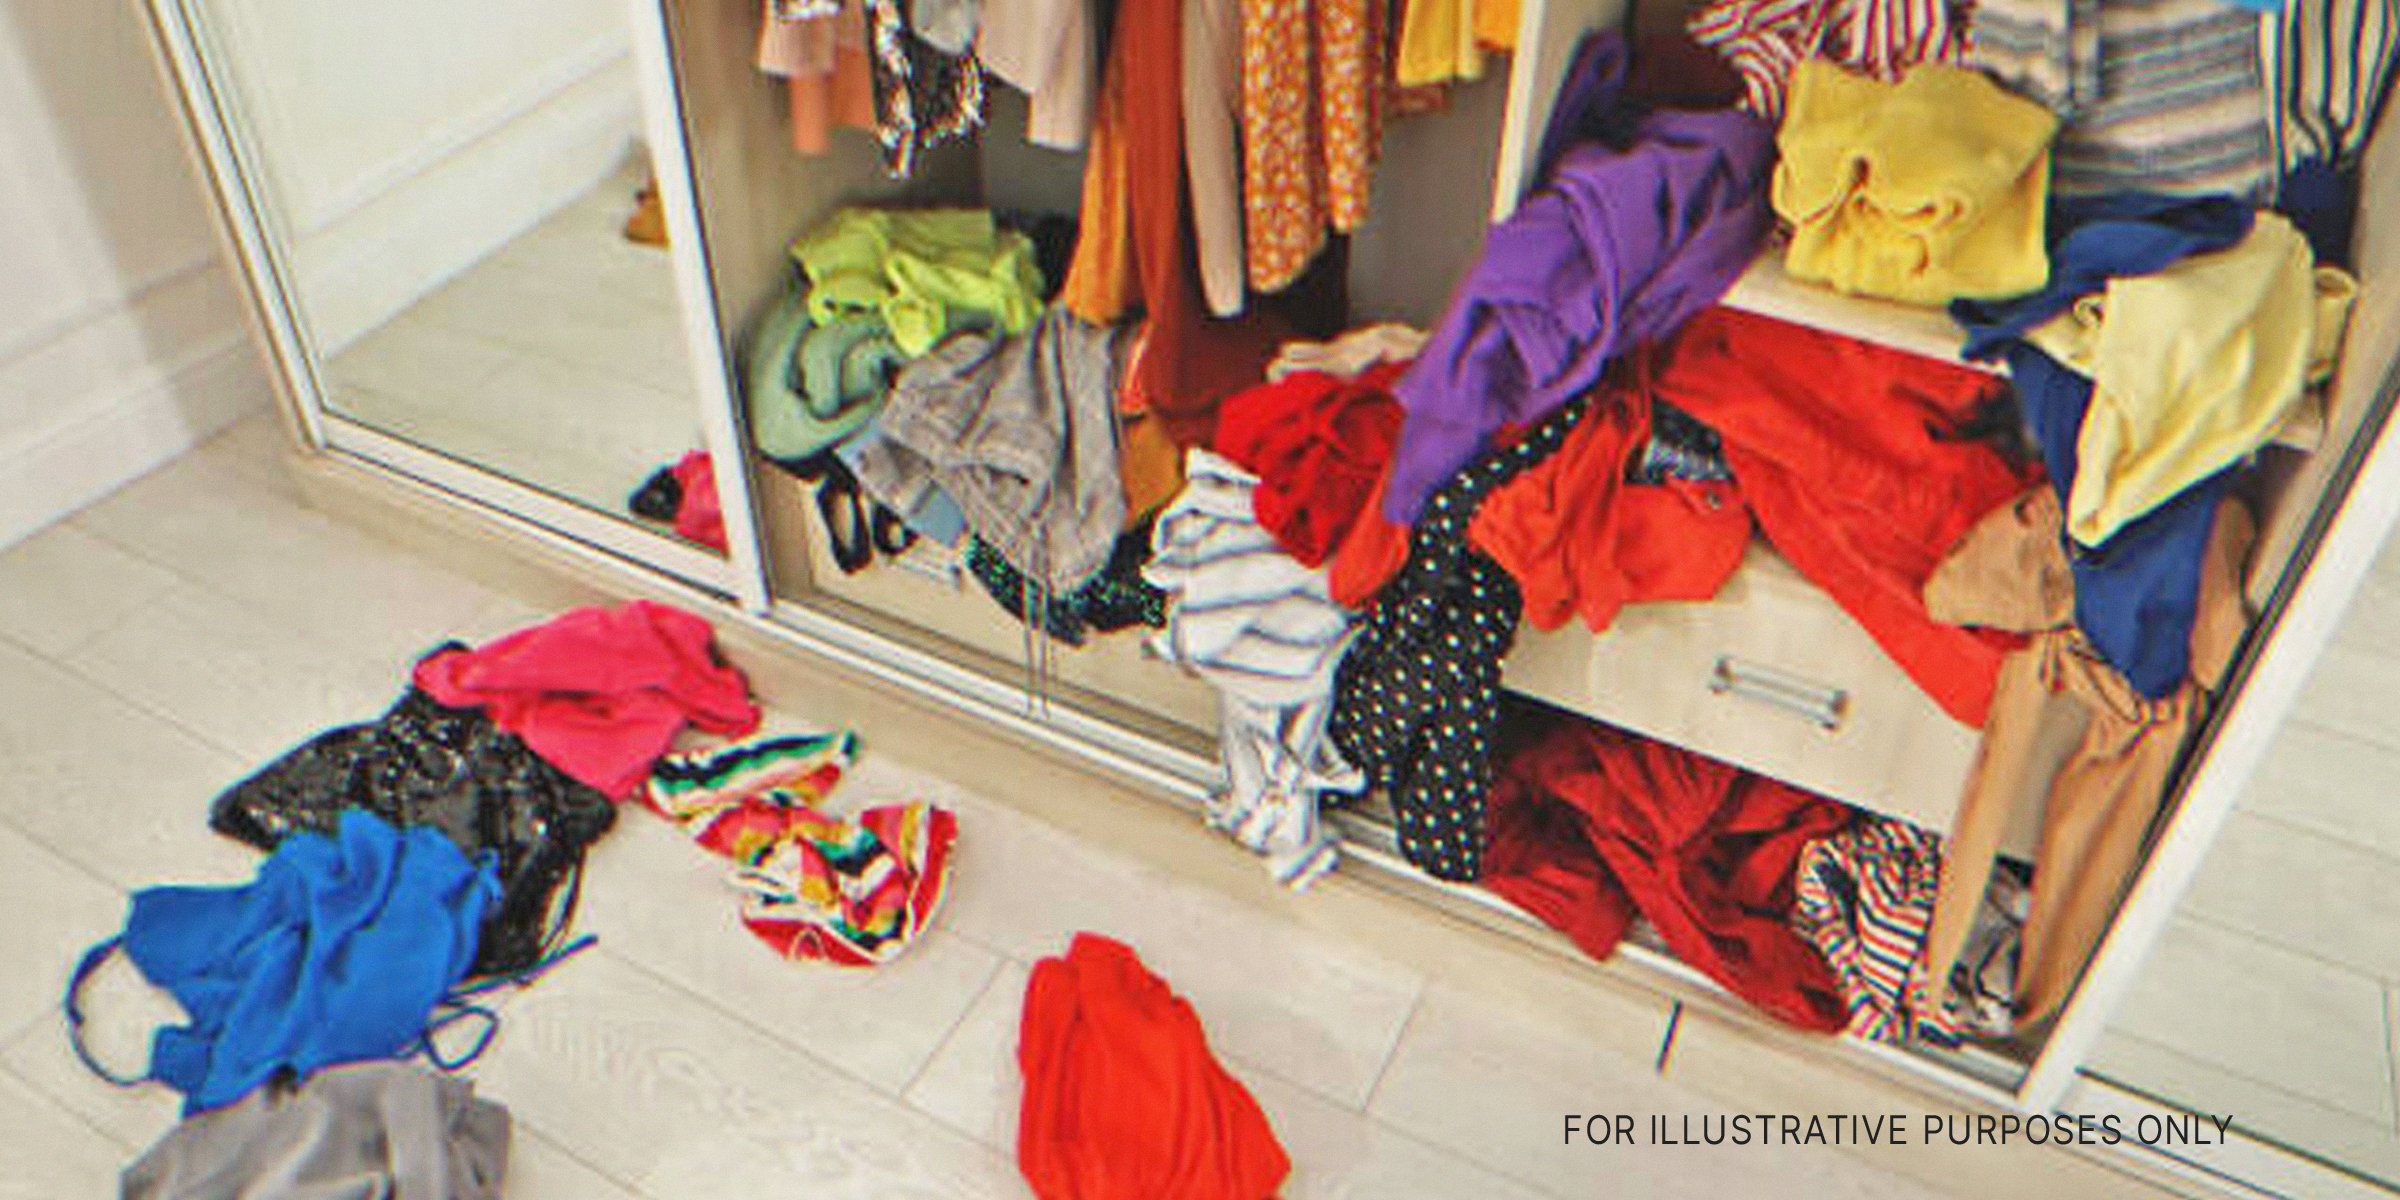 Closet with clothes | Source: Shutterstock